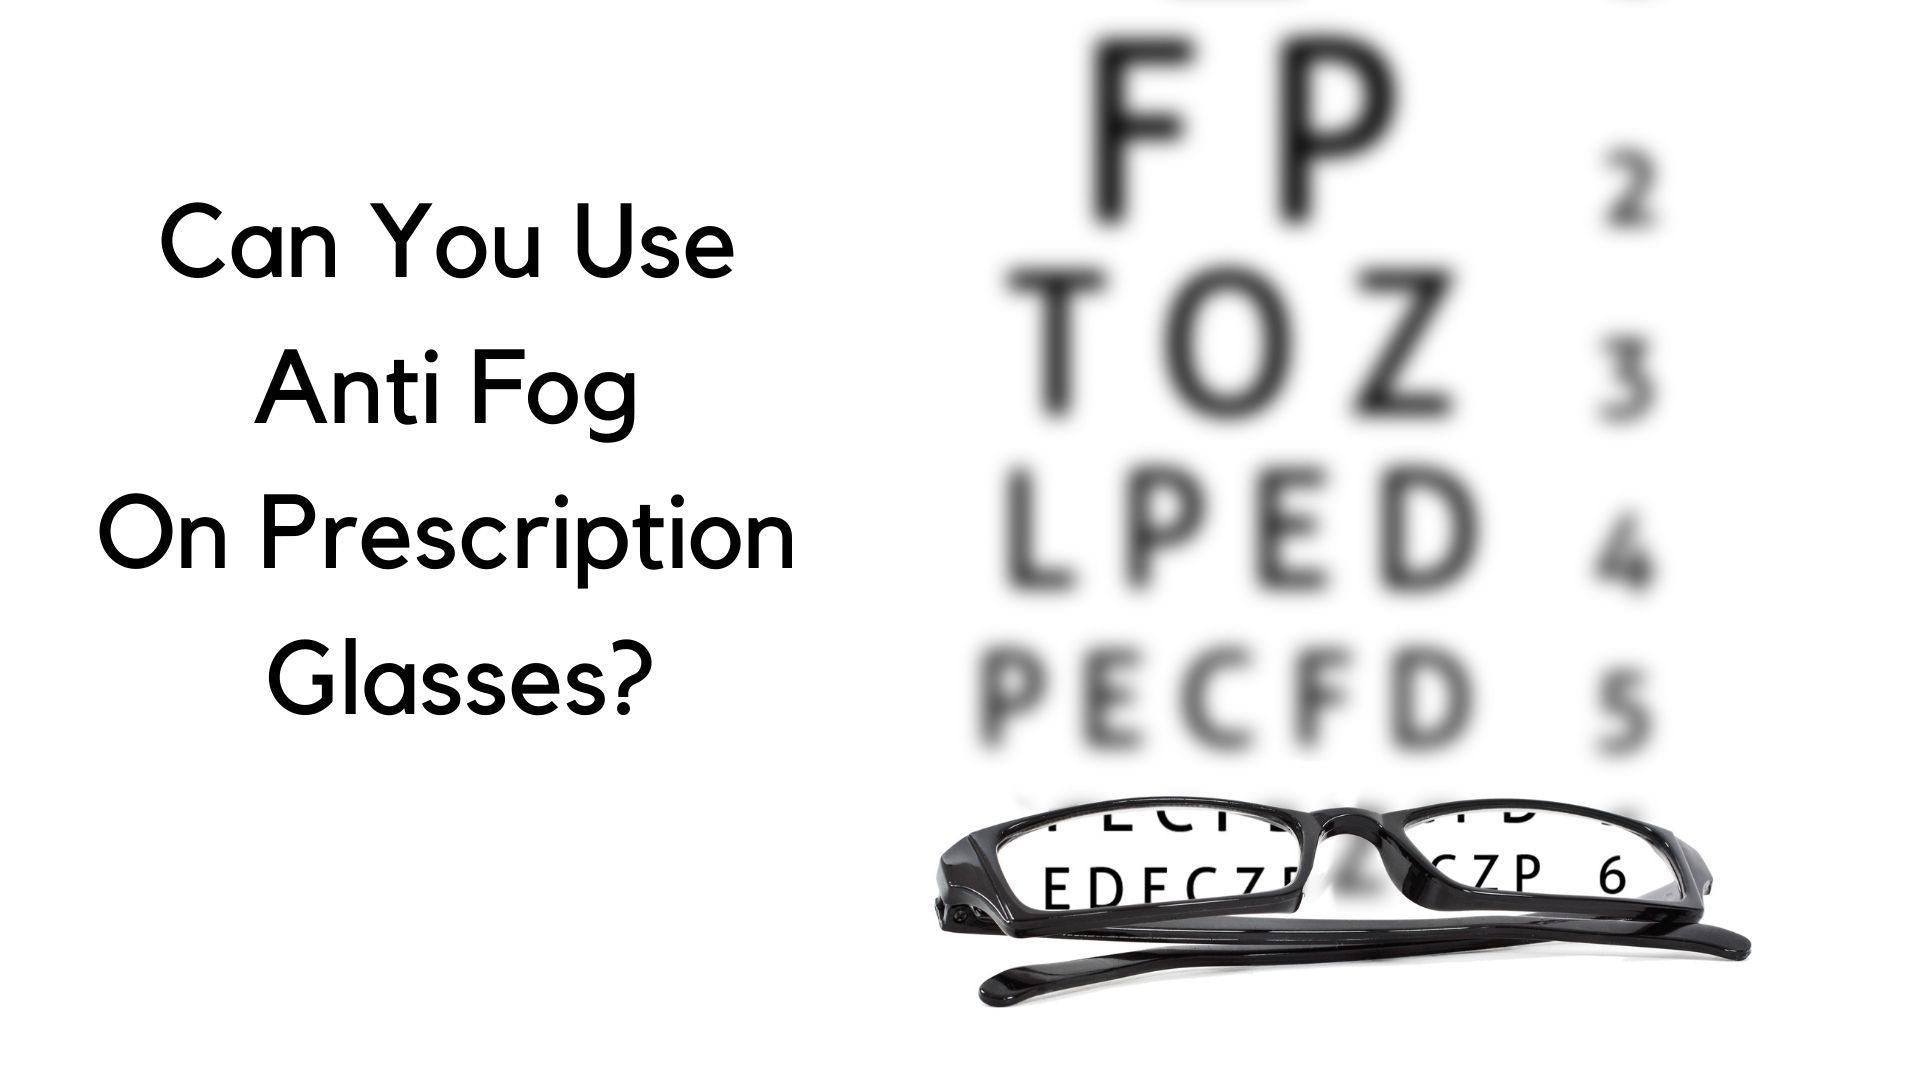 Can You Use Anti Fog On Prescription Glasses?, anti fog for glasses and  more